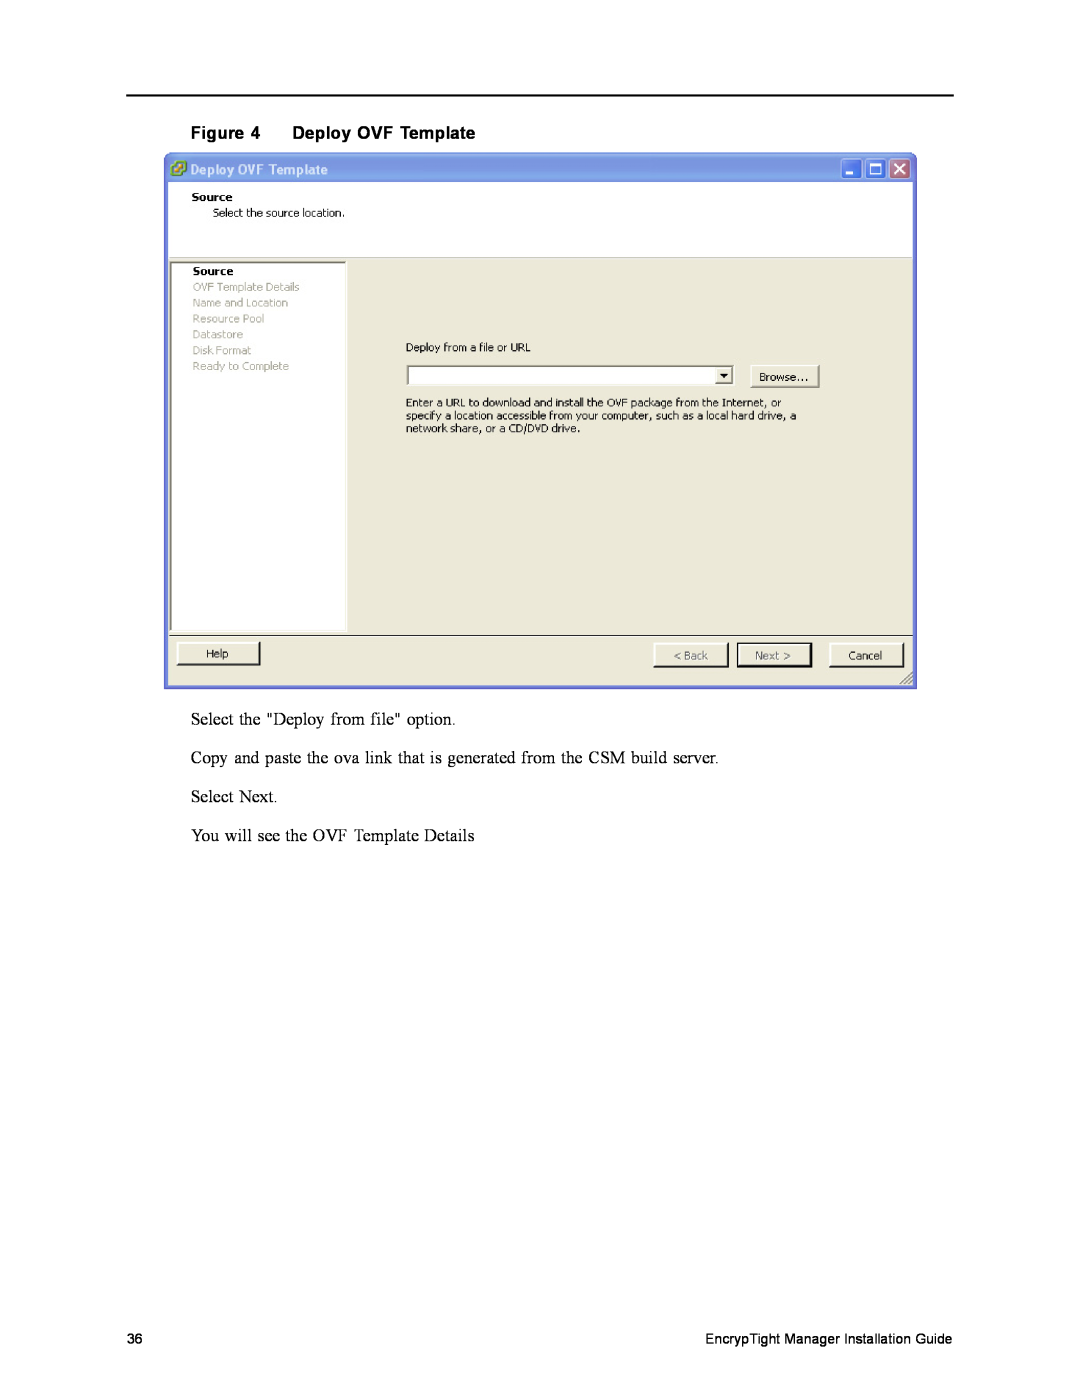 Black Box ET0010A, ET1000A Deploy OVF Template, Select the Deploy from file option, EncrypTight Manager Installation Guide 